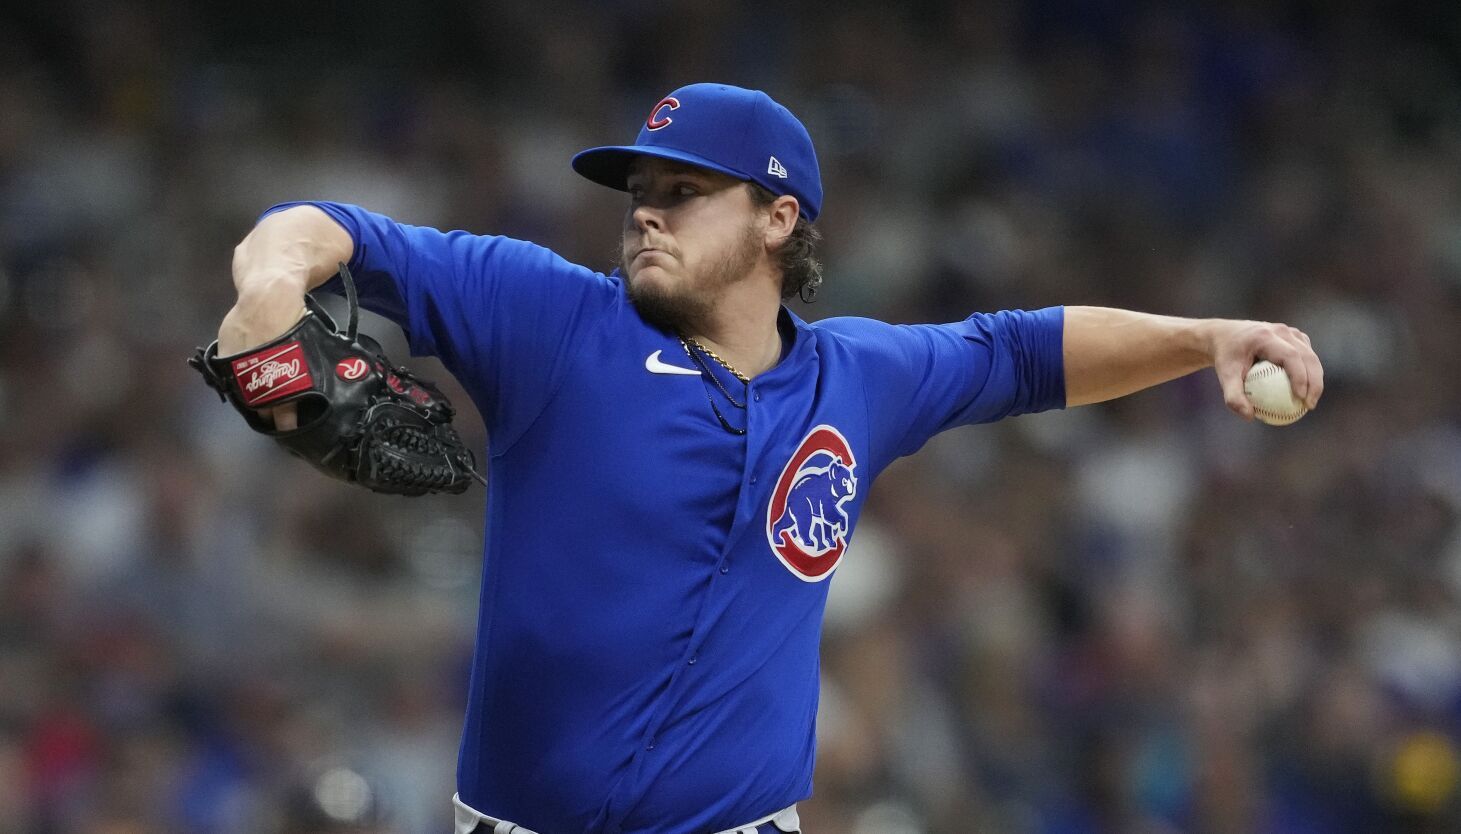 Cubs pitcher Justin Steele looks to continue quality play in Spring